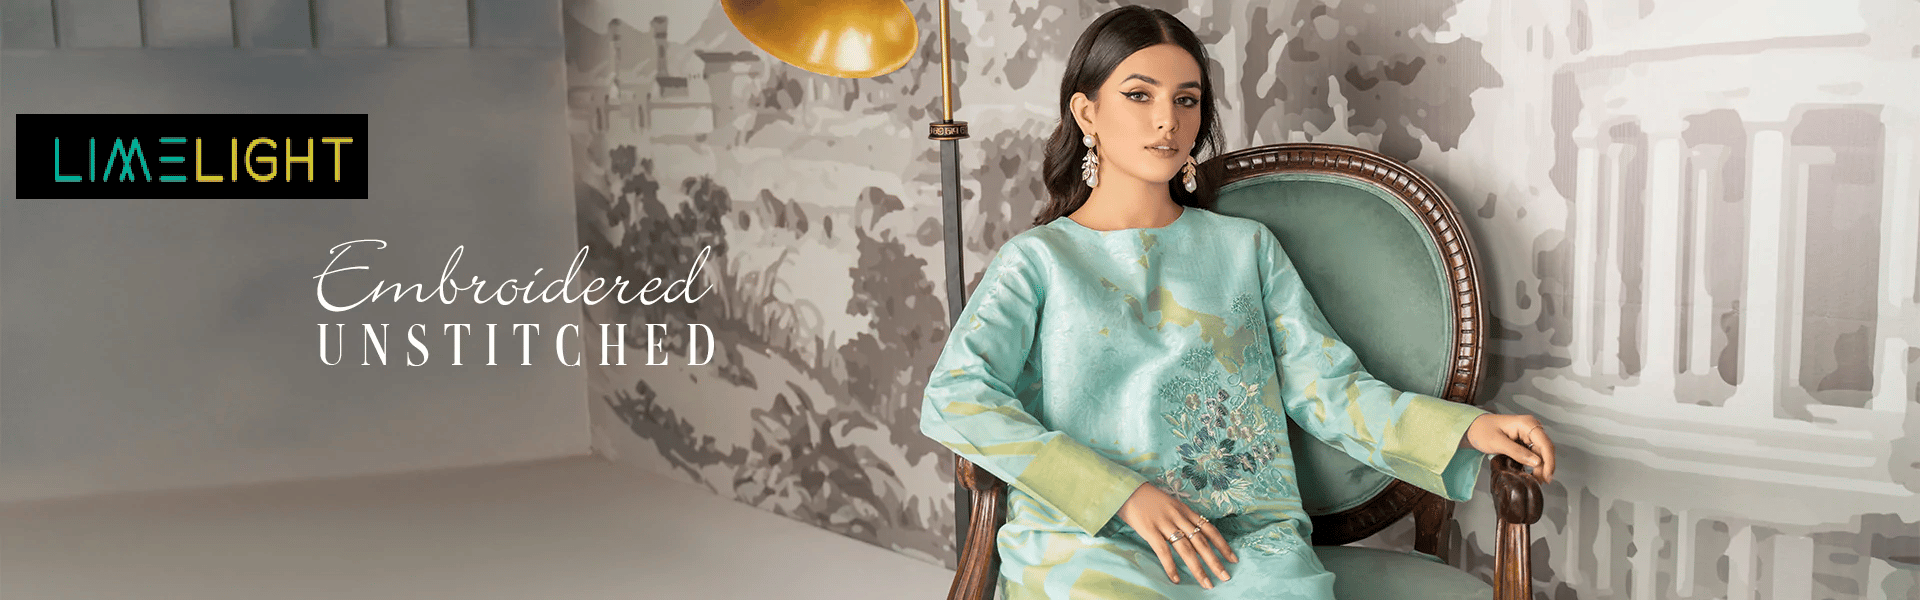 Limelight Winter Unstitched Embroidered Collection